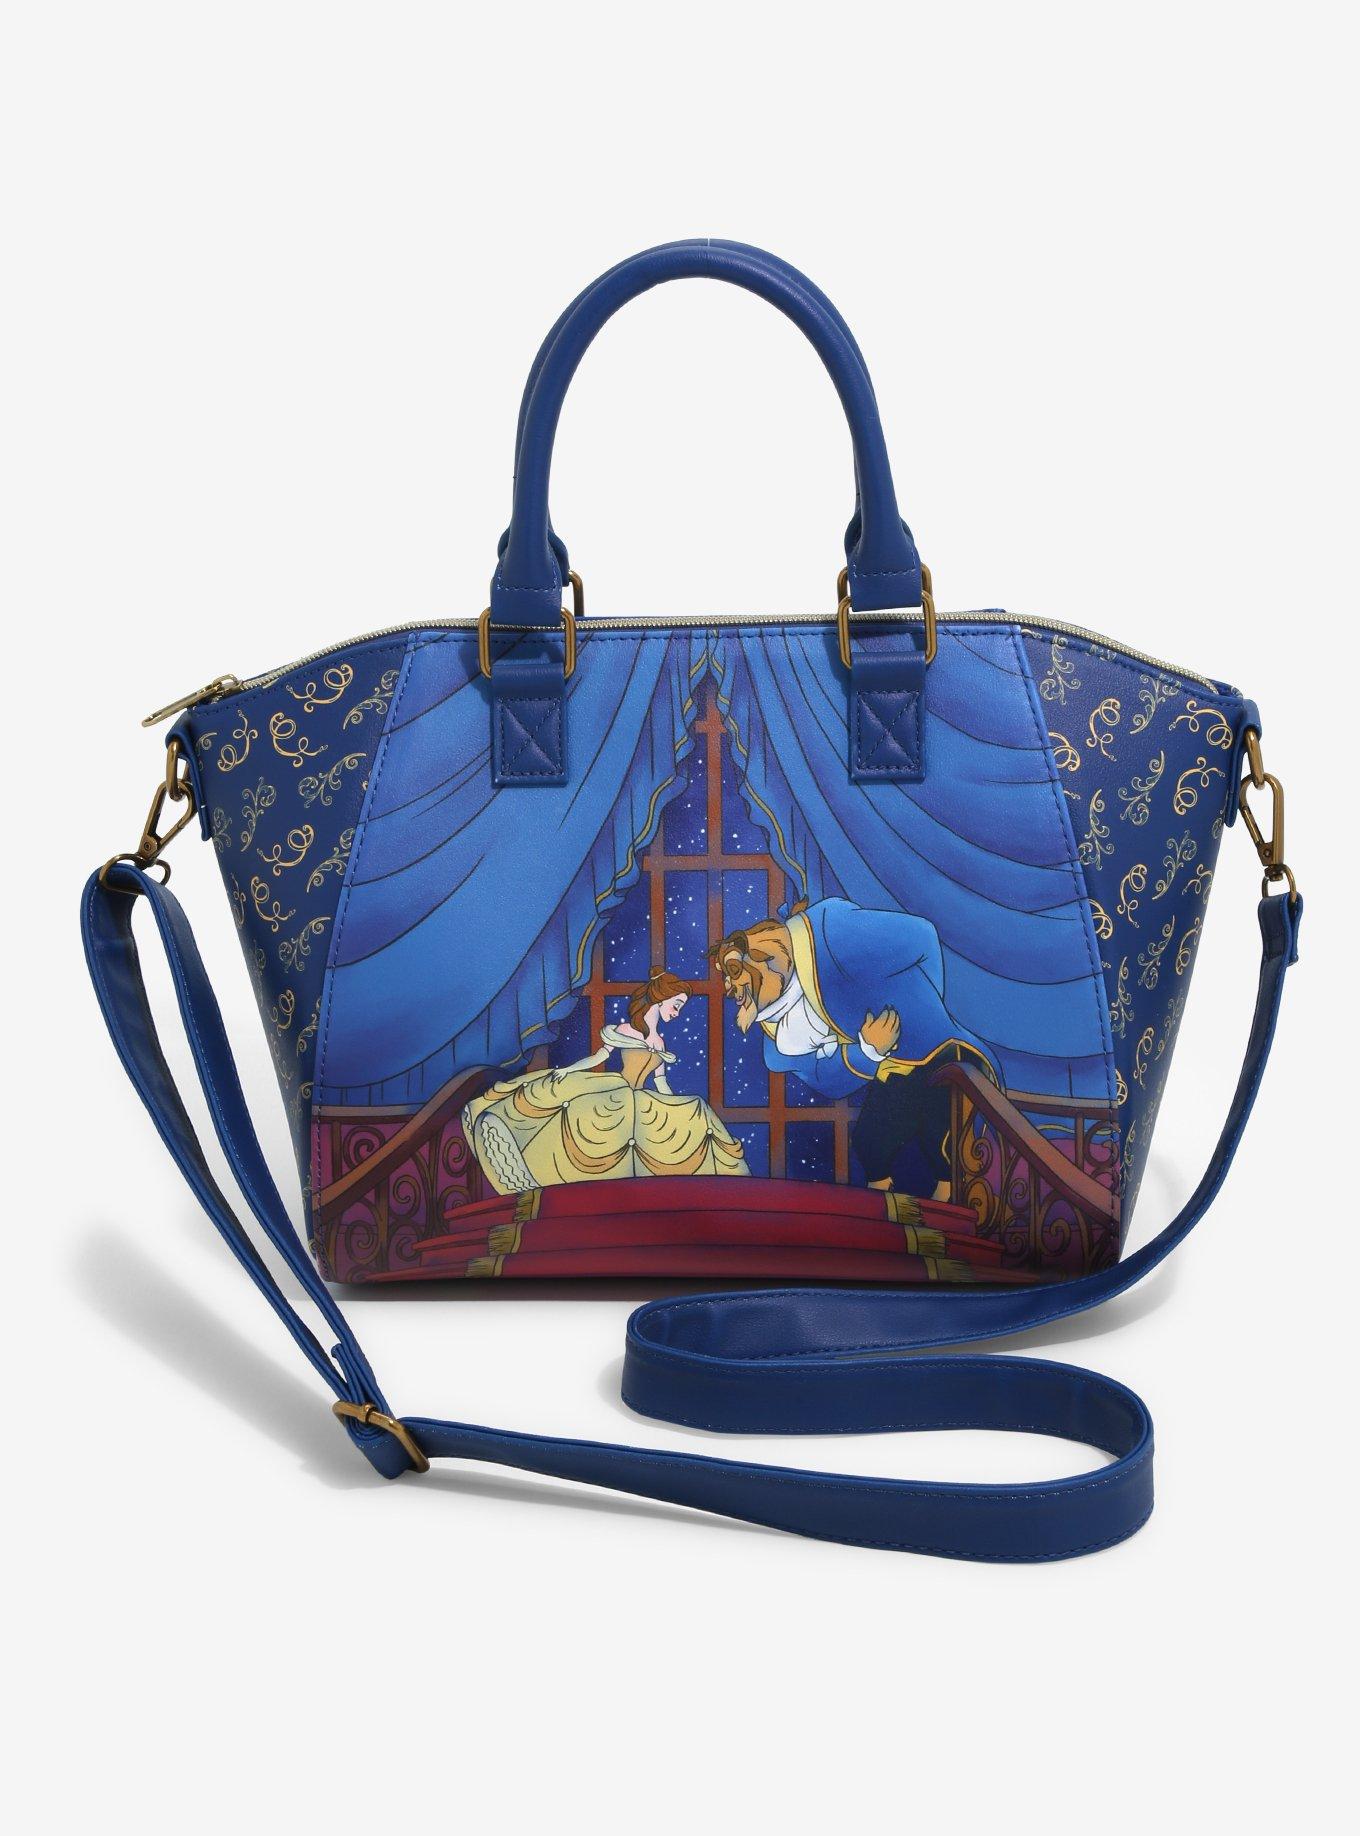 beauty and the beast loungefly